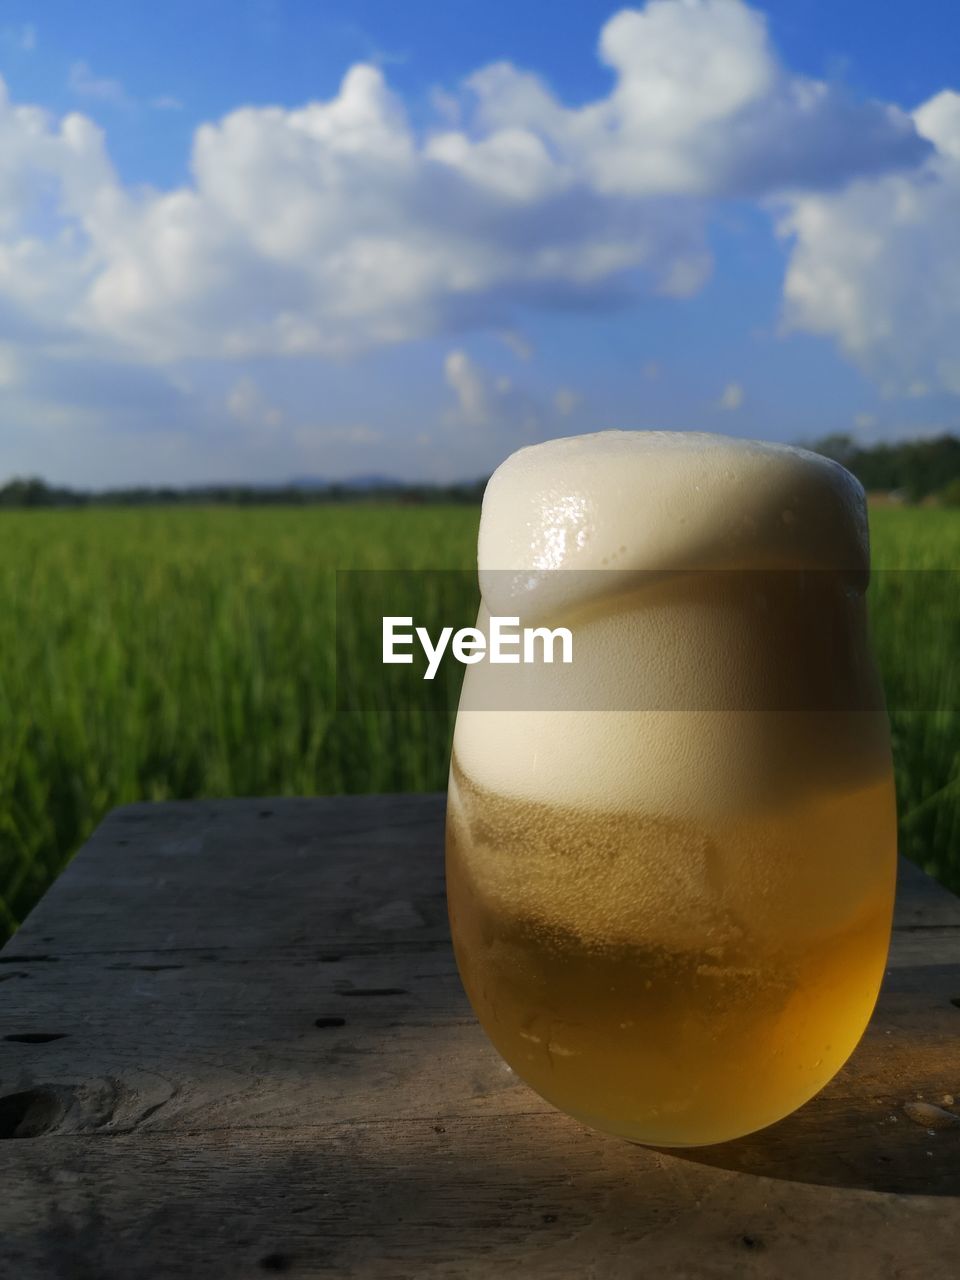 food and drink, cloud, sky, yellow, refreshment, drink, nature, morning, food, land, green, no people, freshness, glass, alcohol, landscape, drinking glass, close-up, beer, plant, focus on foreground, day, outdoors, frothy drink, field, blue, agriculture, light, lighting, beer glass